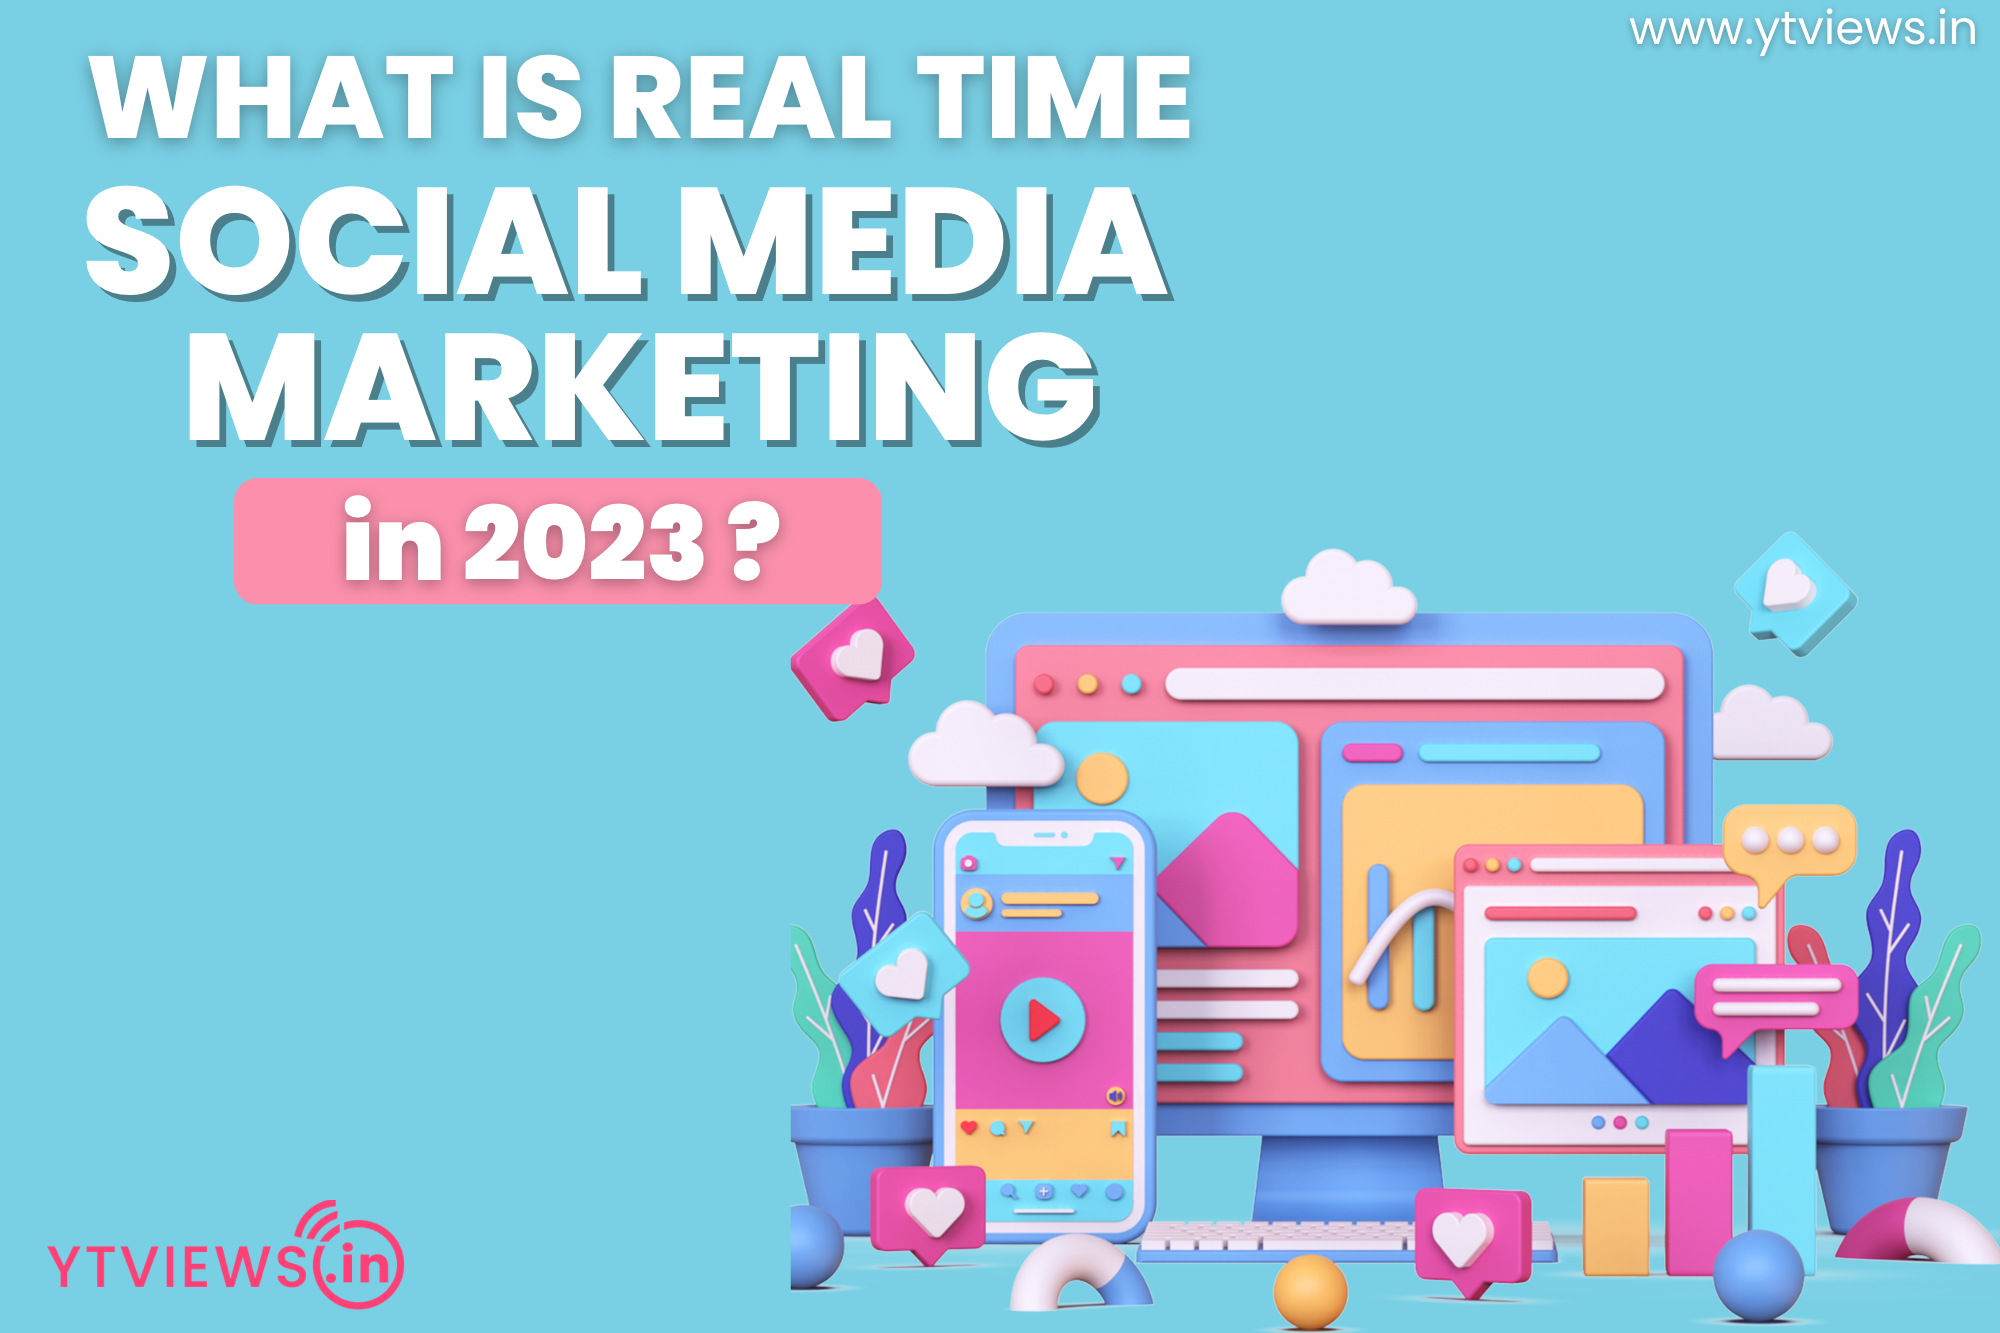 What is Real Time Social Media Marketing in 2023?